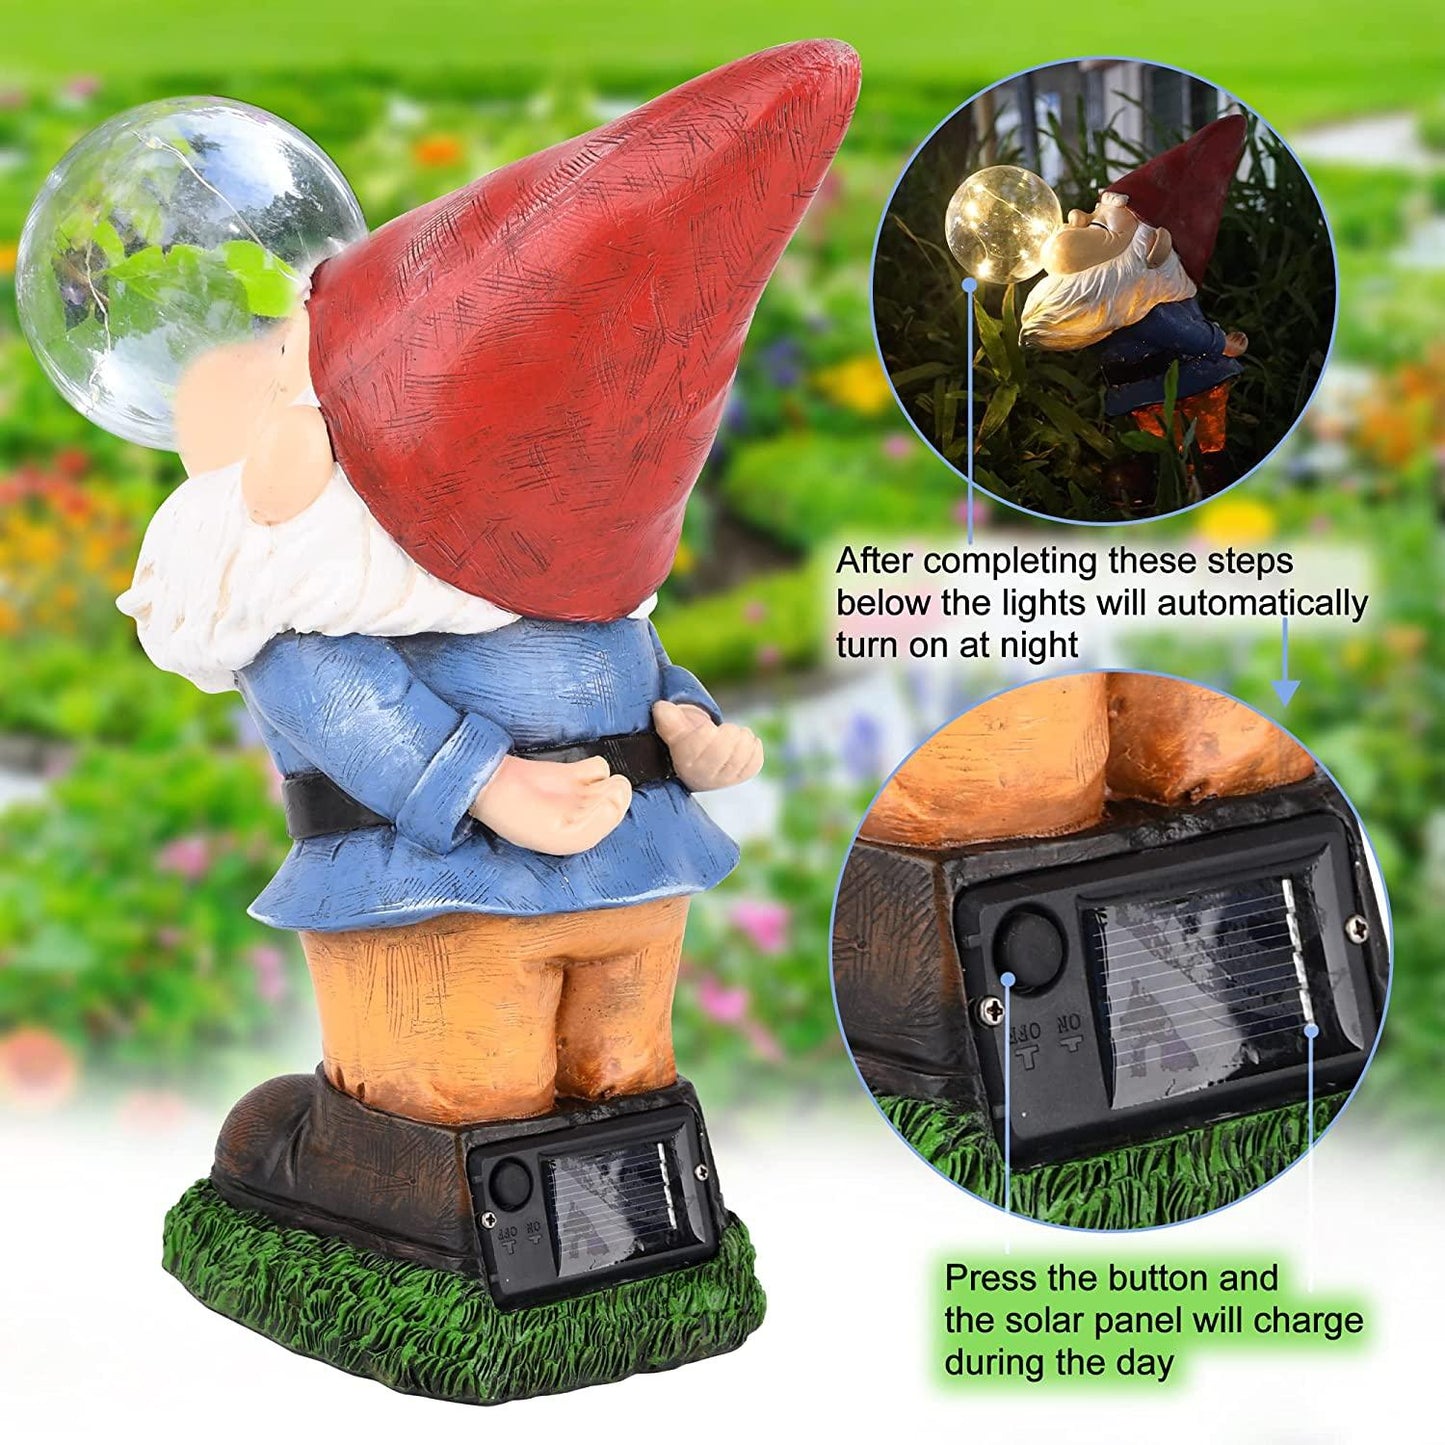 Garden Gnomes Decor Statues - Gnomes Garden Decorations Funny Statues Outdoor - If you say i do